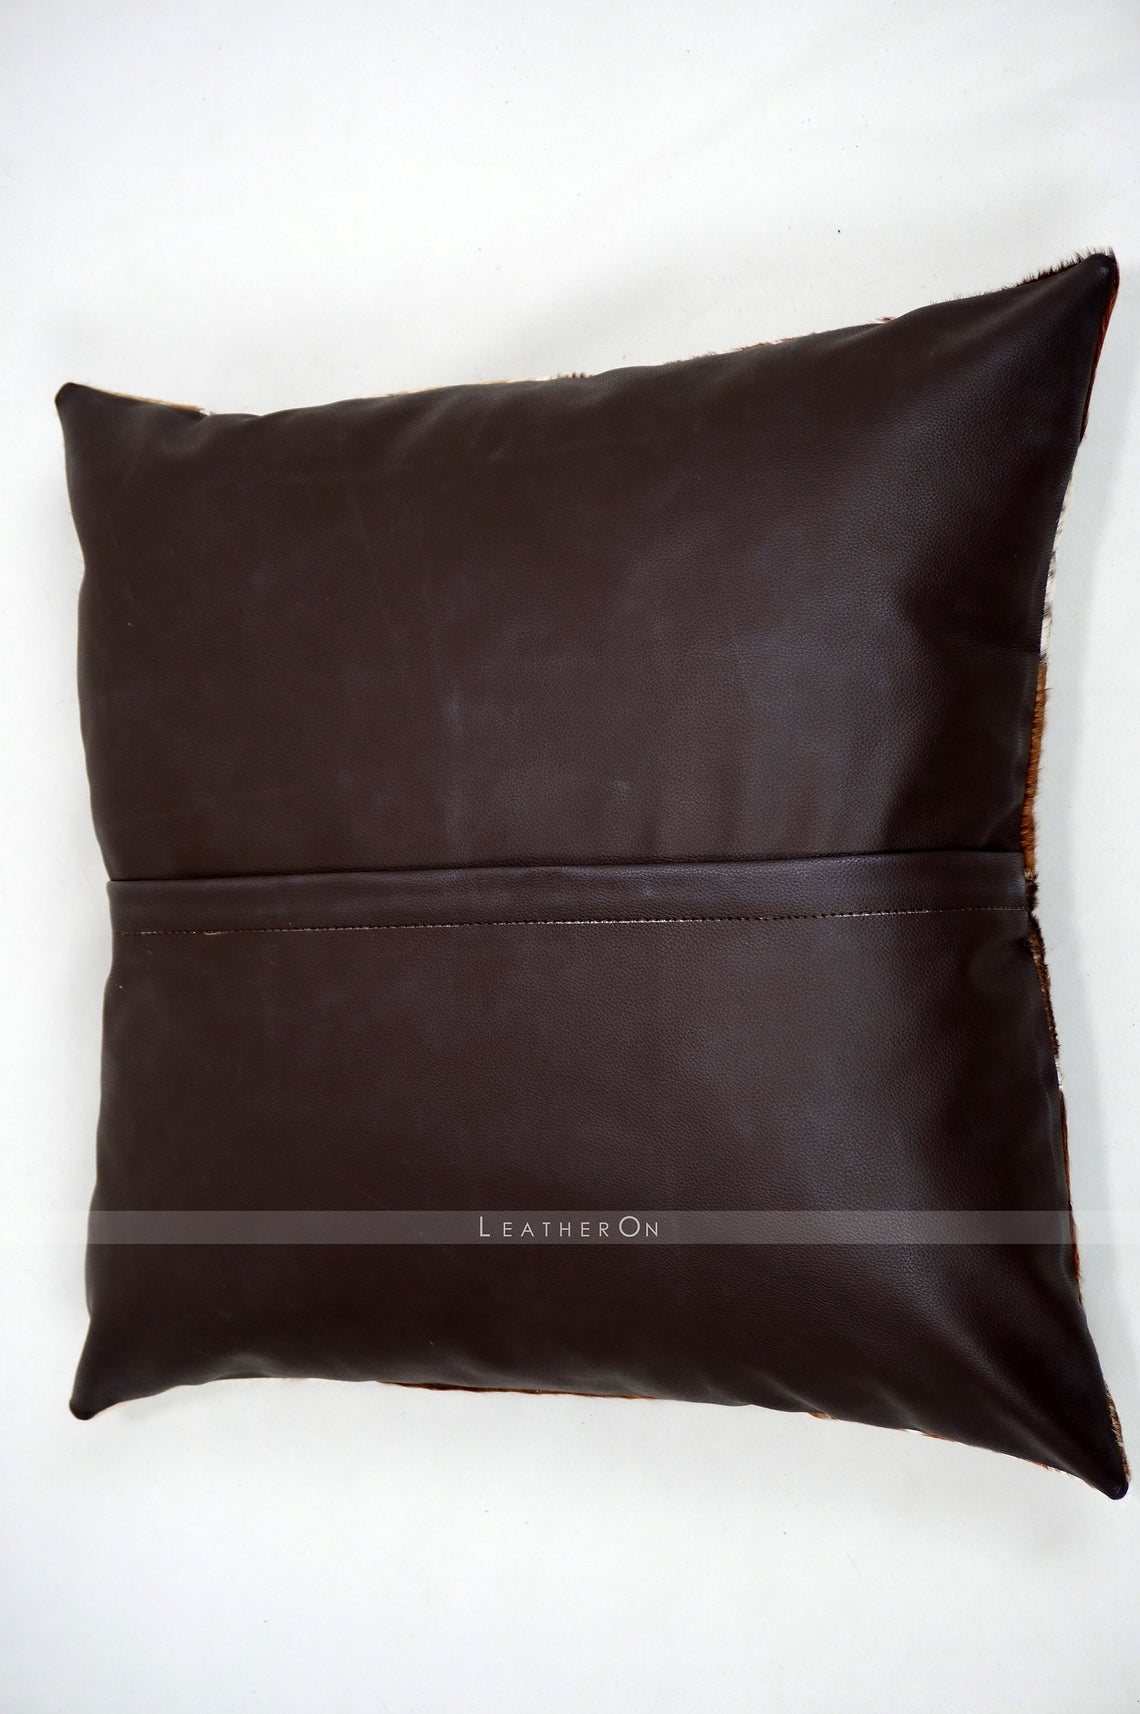 Hair-on-Leather Patchwork Throw Pillow With Down Filling 枕、ピロー 